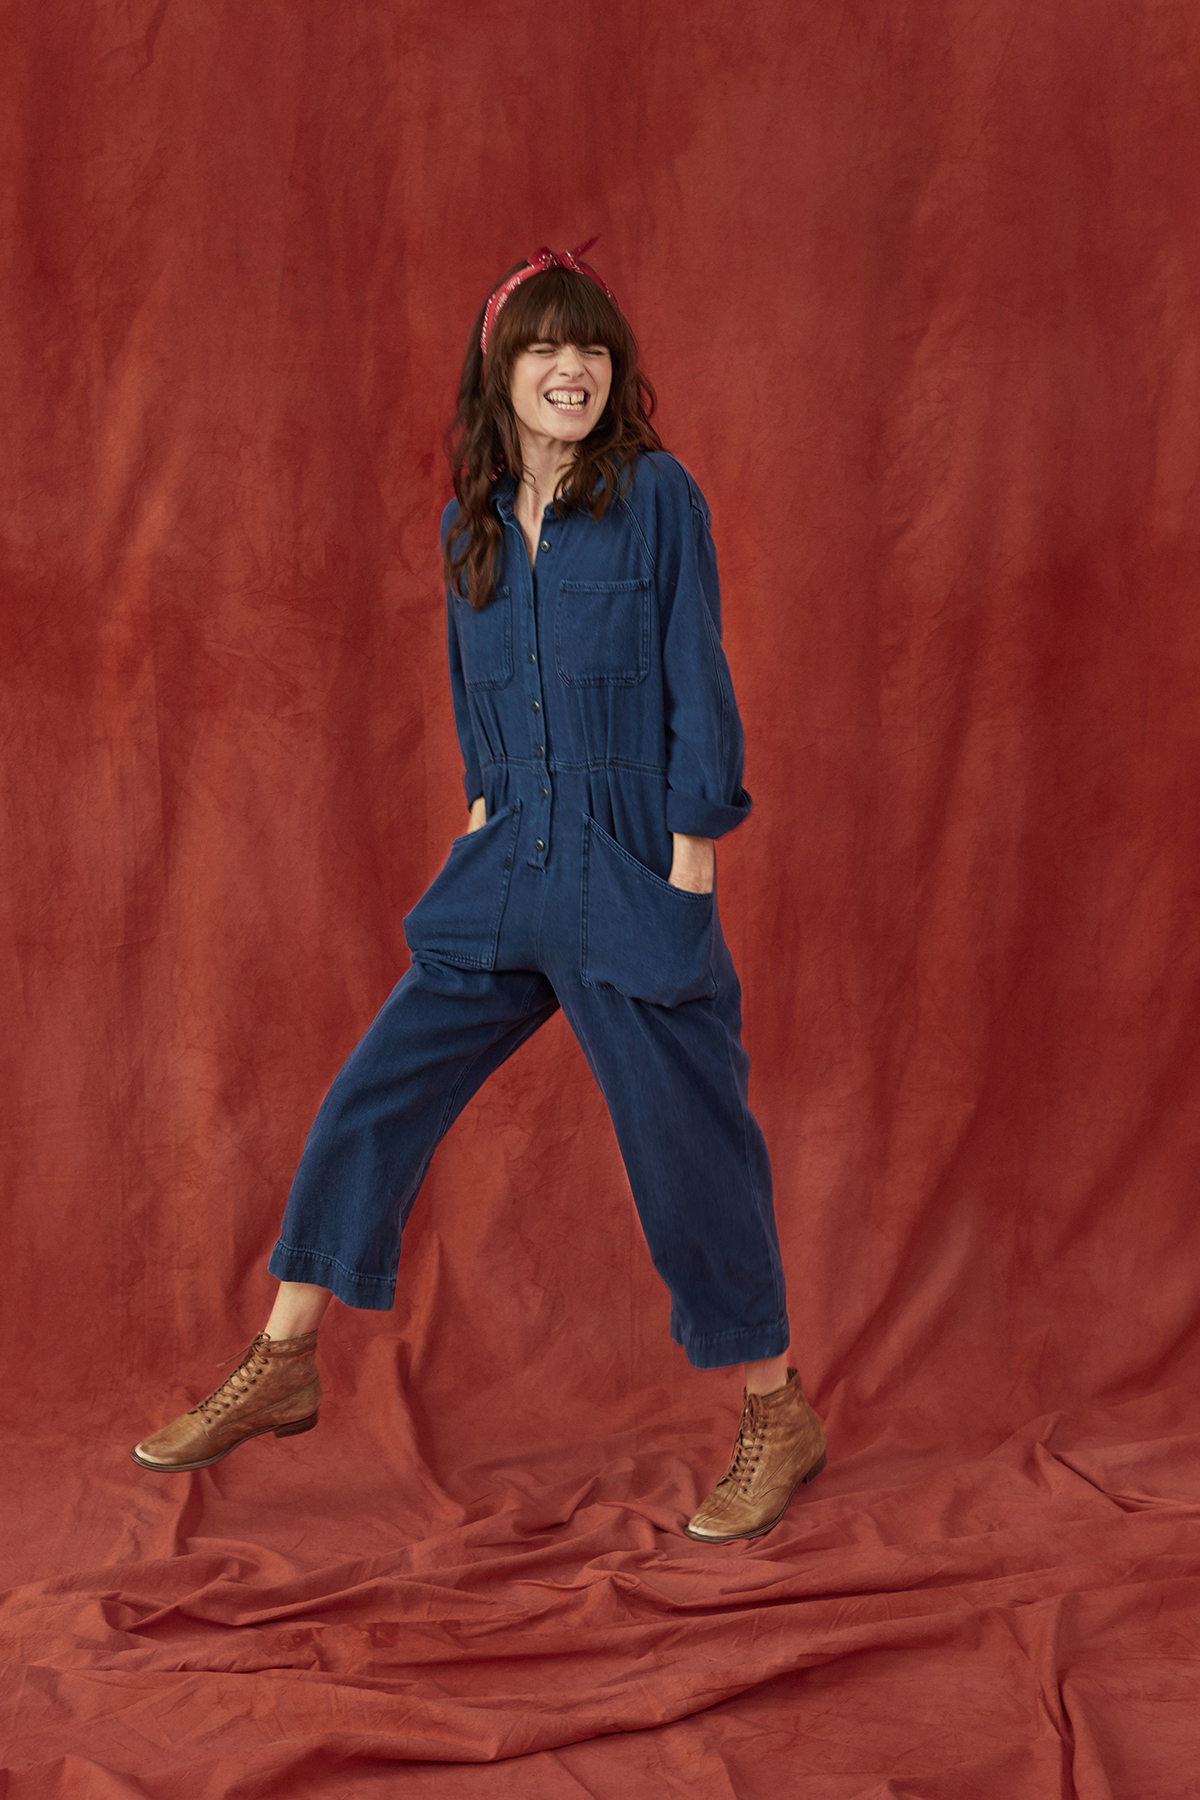 THE GREAT. x Cotton ‘The Rosie Jumpsuit.’ This timeless silhouette honors the fearless women who do great things and create history. It was inspired by the iconic cotton workwear that was as resilient as Rosie herself. You too can be a modern day Rosie. Photo Credit: Courtesy of THE GREAT. (Photography by Morgan Pansing)